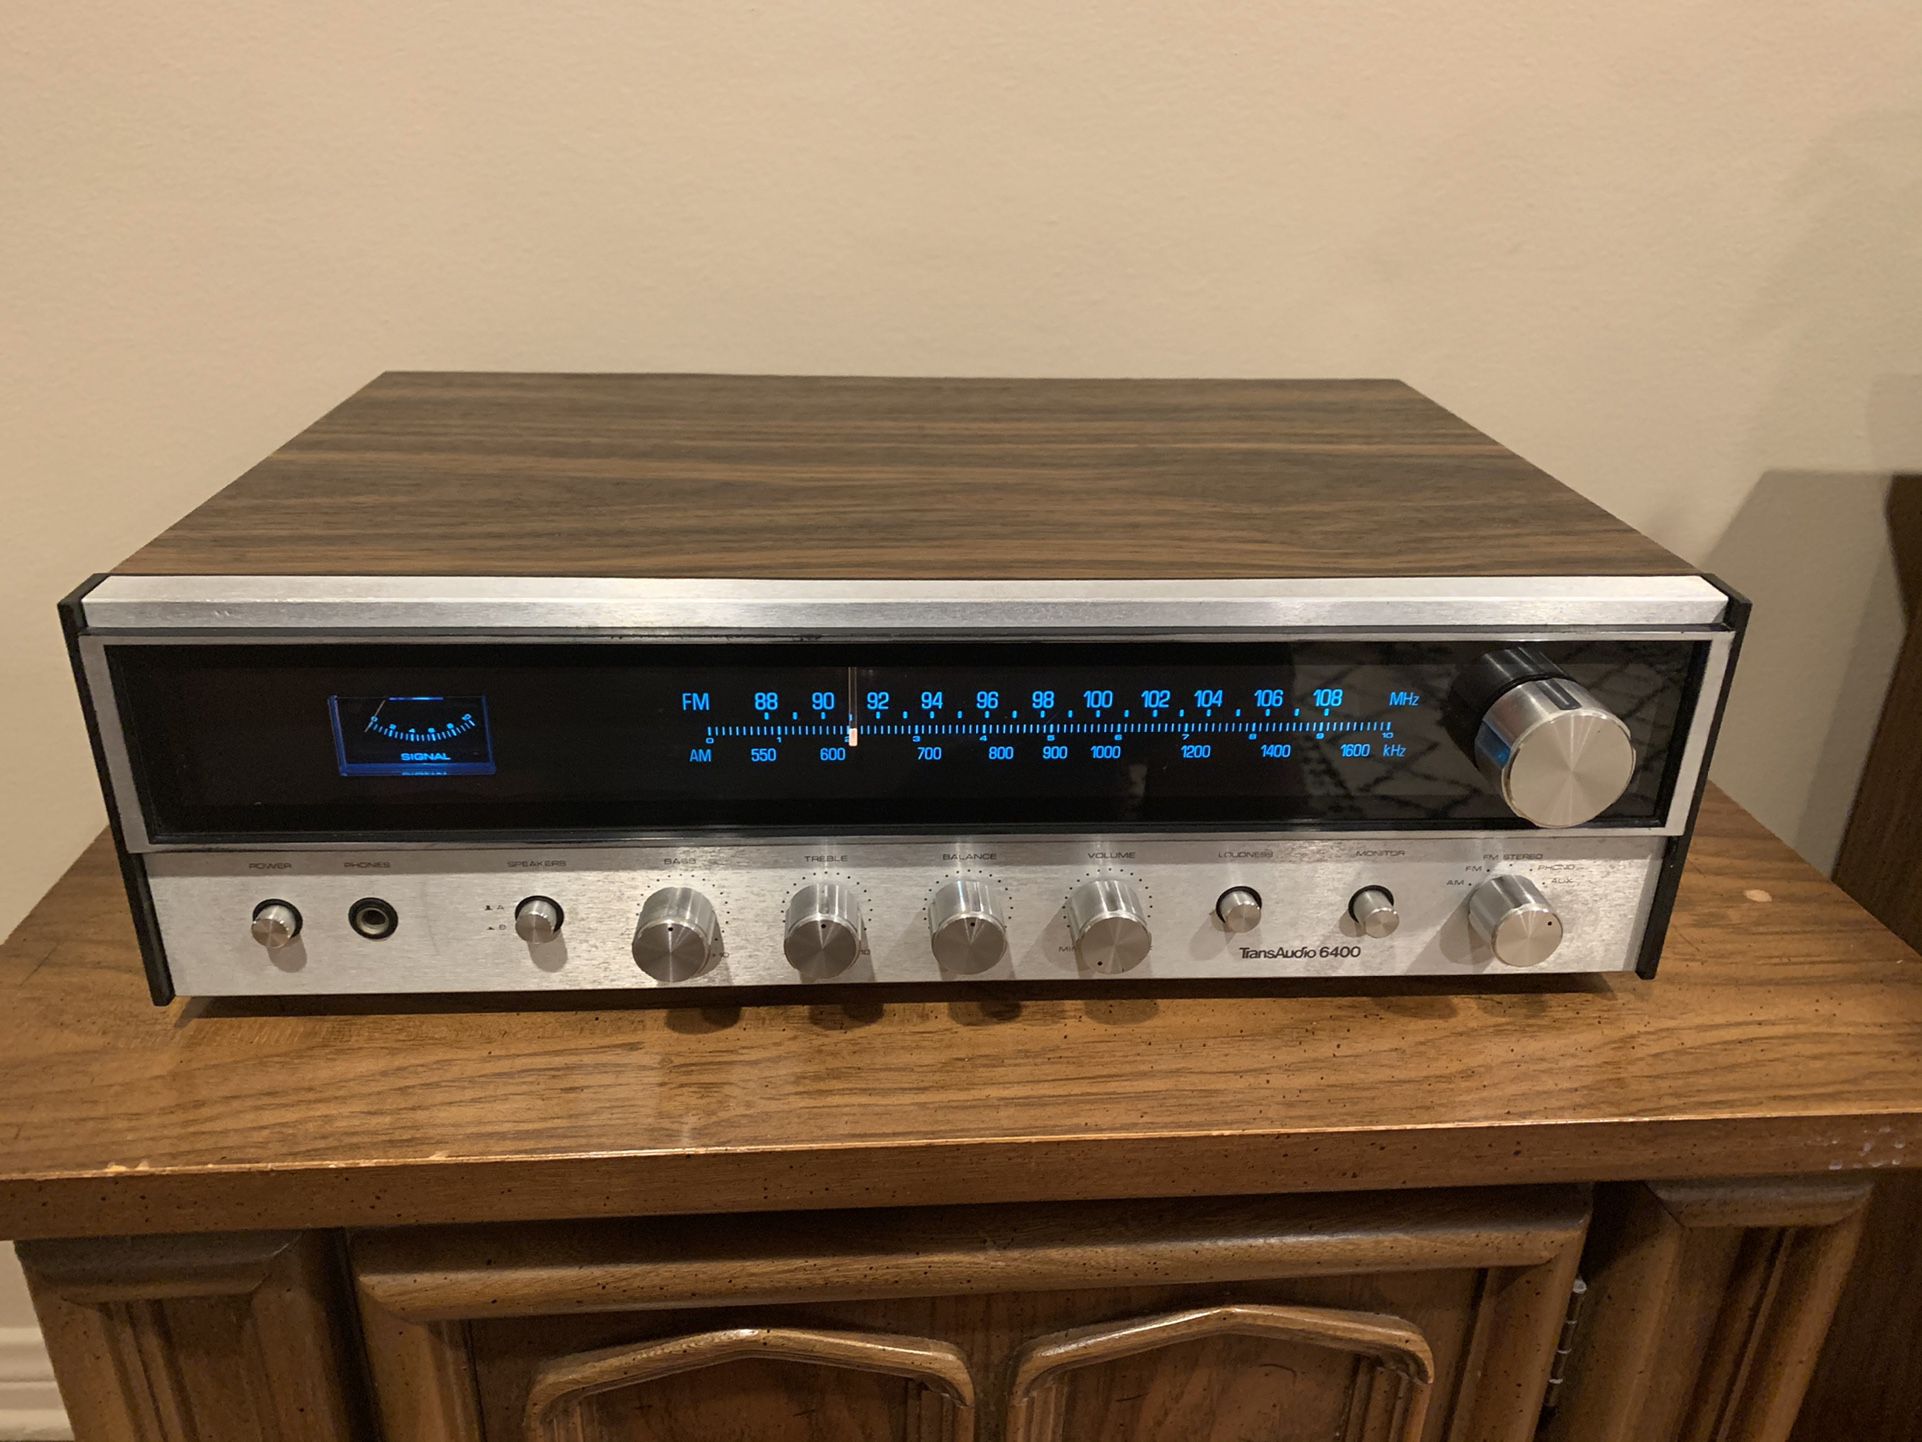 Vintage TransAudio 6400 AM/FM Stereo Receiver - Tested & Working